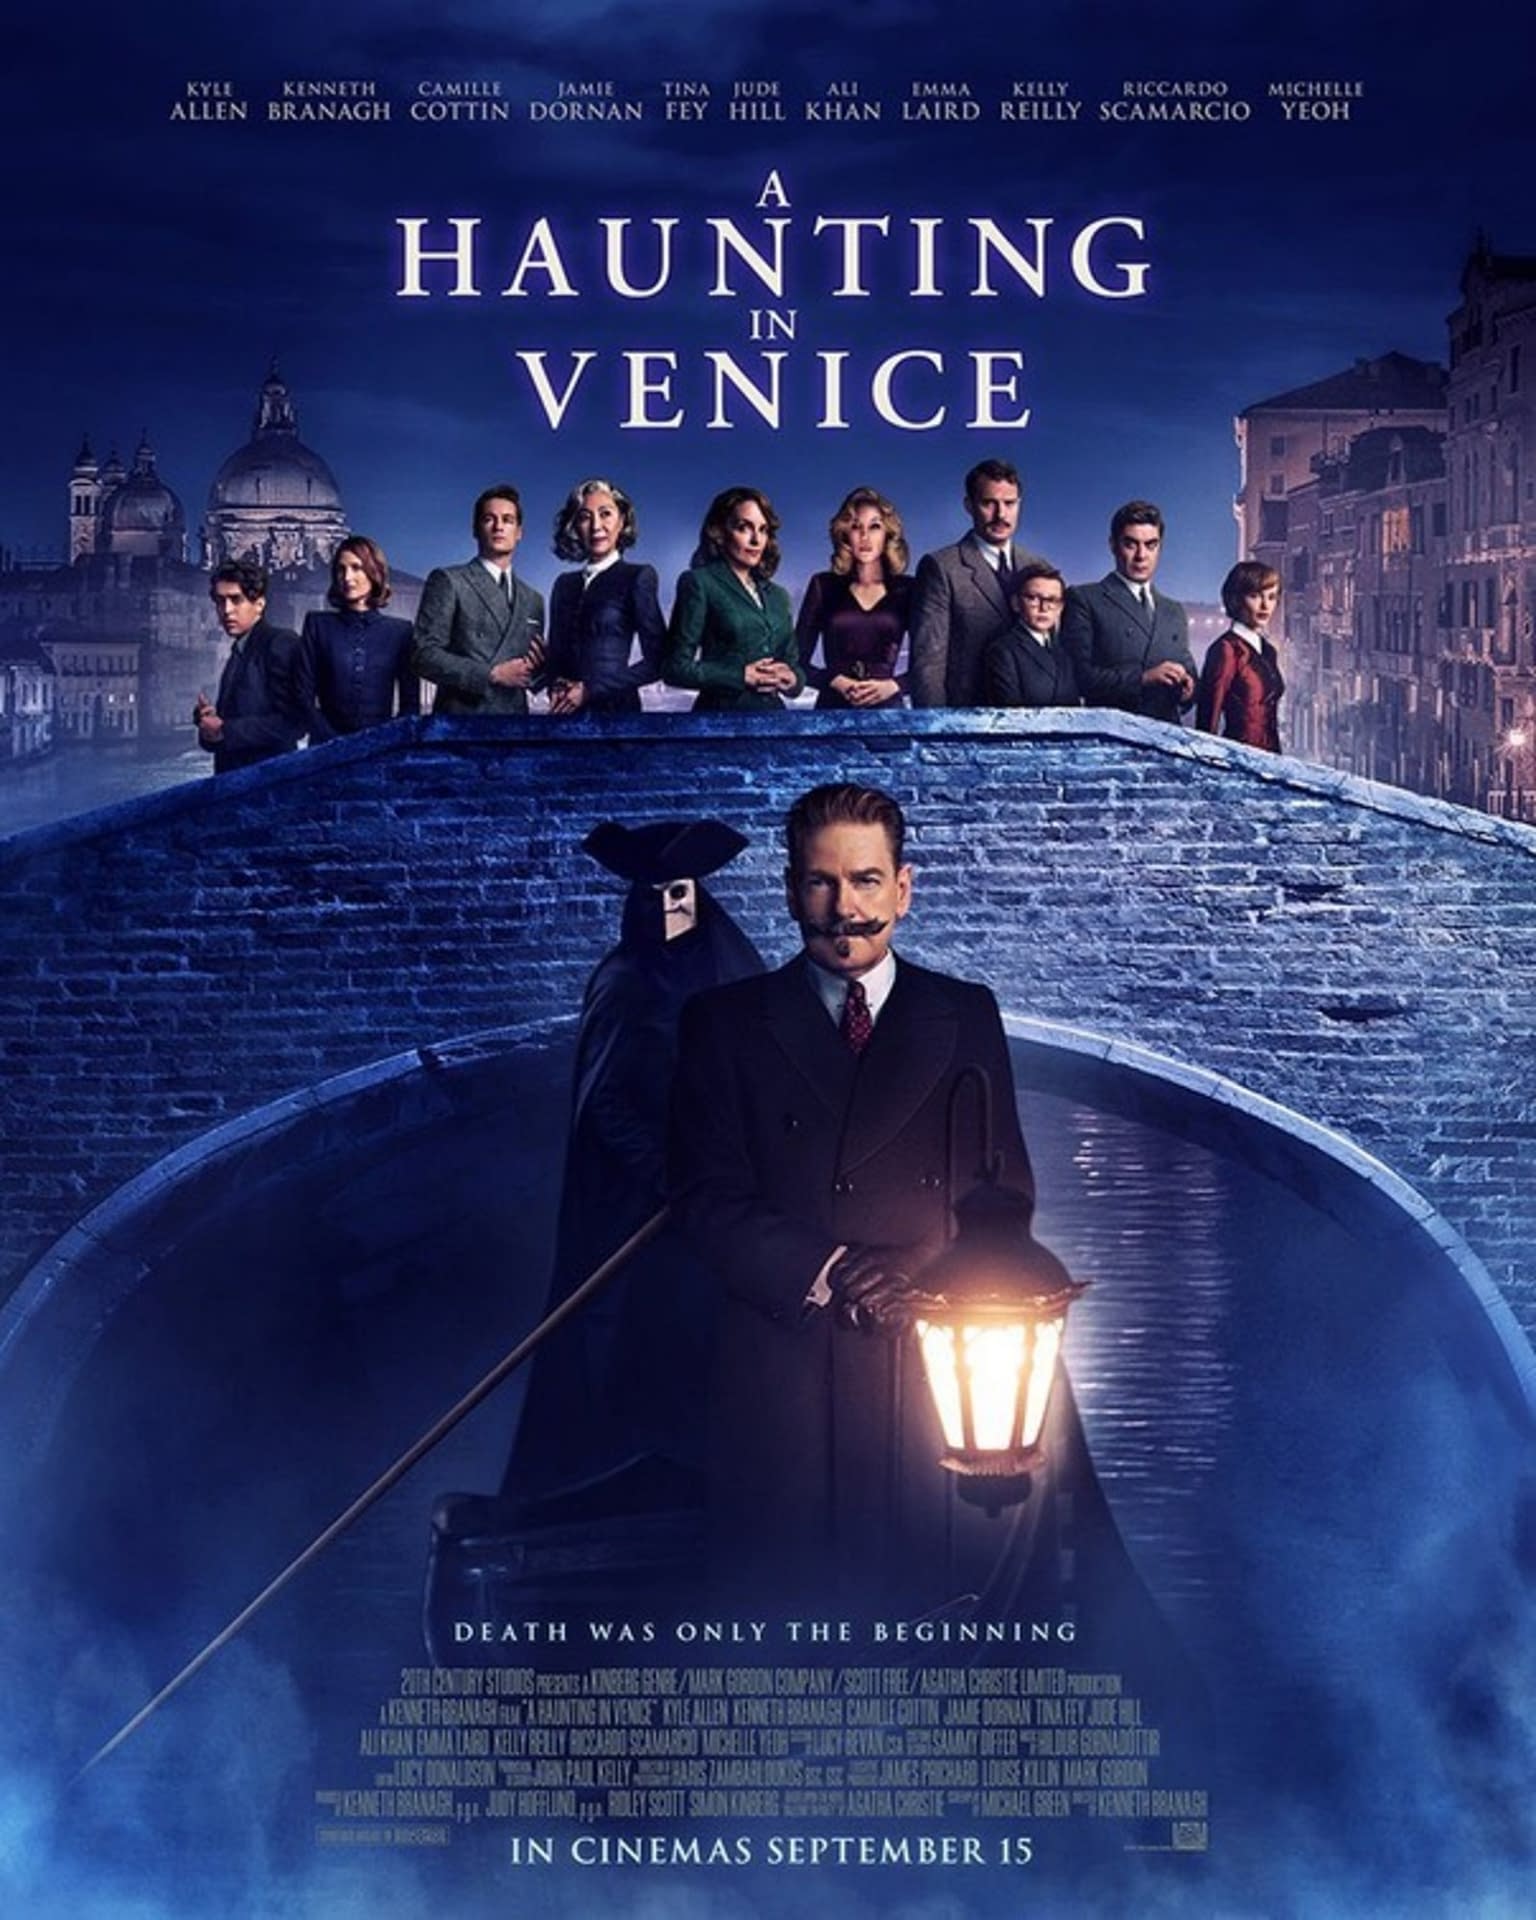 A Haunting in Venice 2 New International Posters Spotlight The Cast